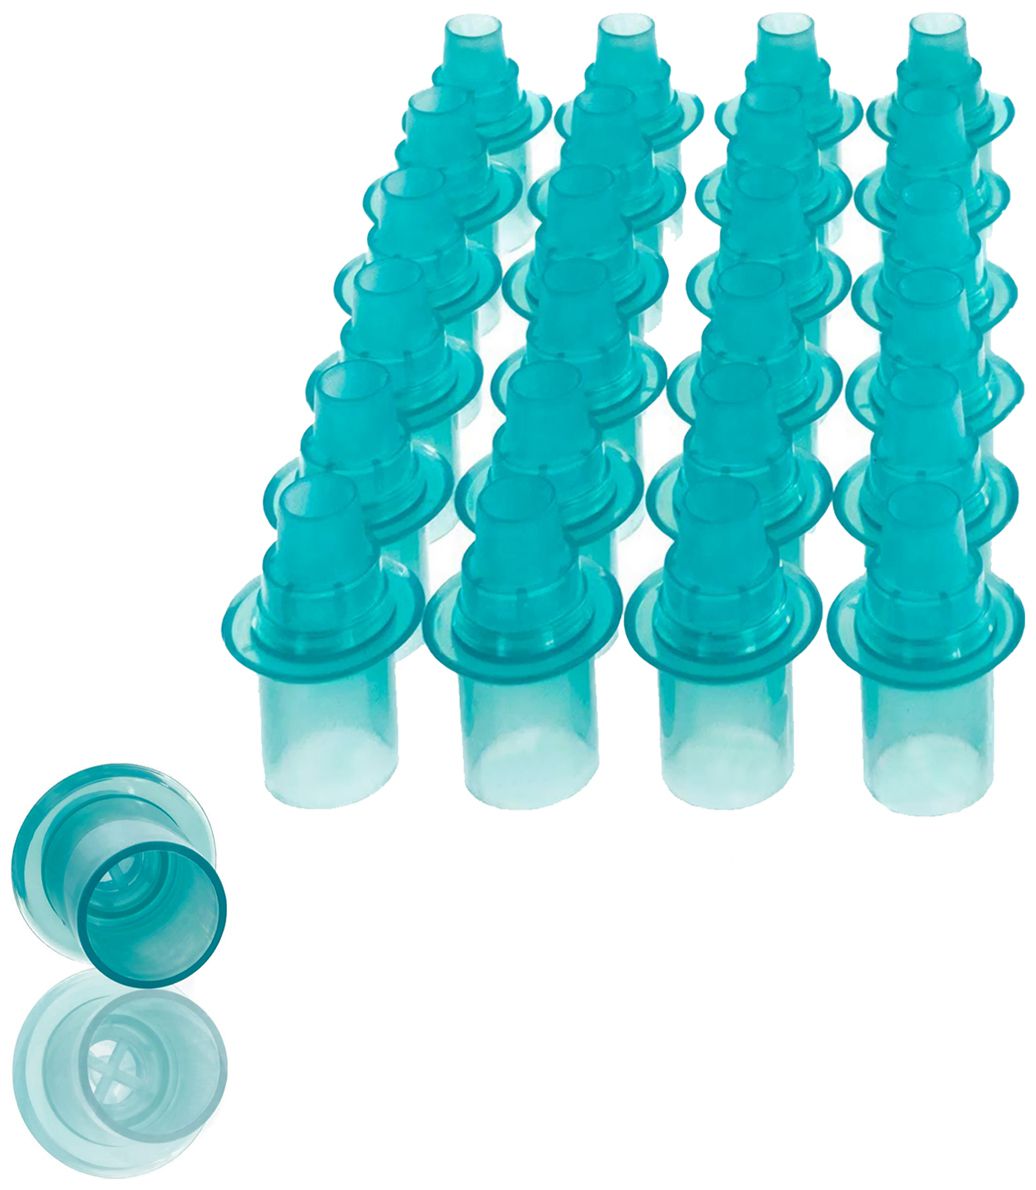 ACE blue mouthpieces - for ACE AL 5500 Plus, ACE AF-33, ACE One, ACE X and many more. - 25 pieces